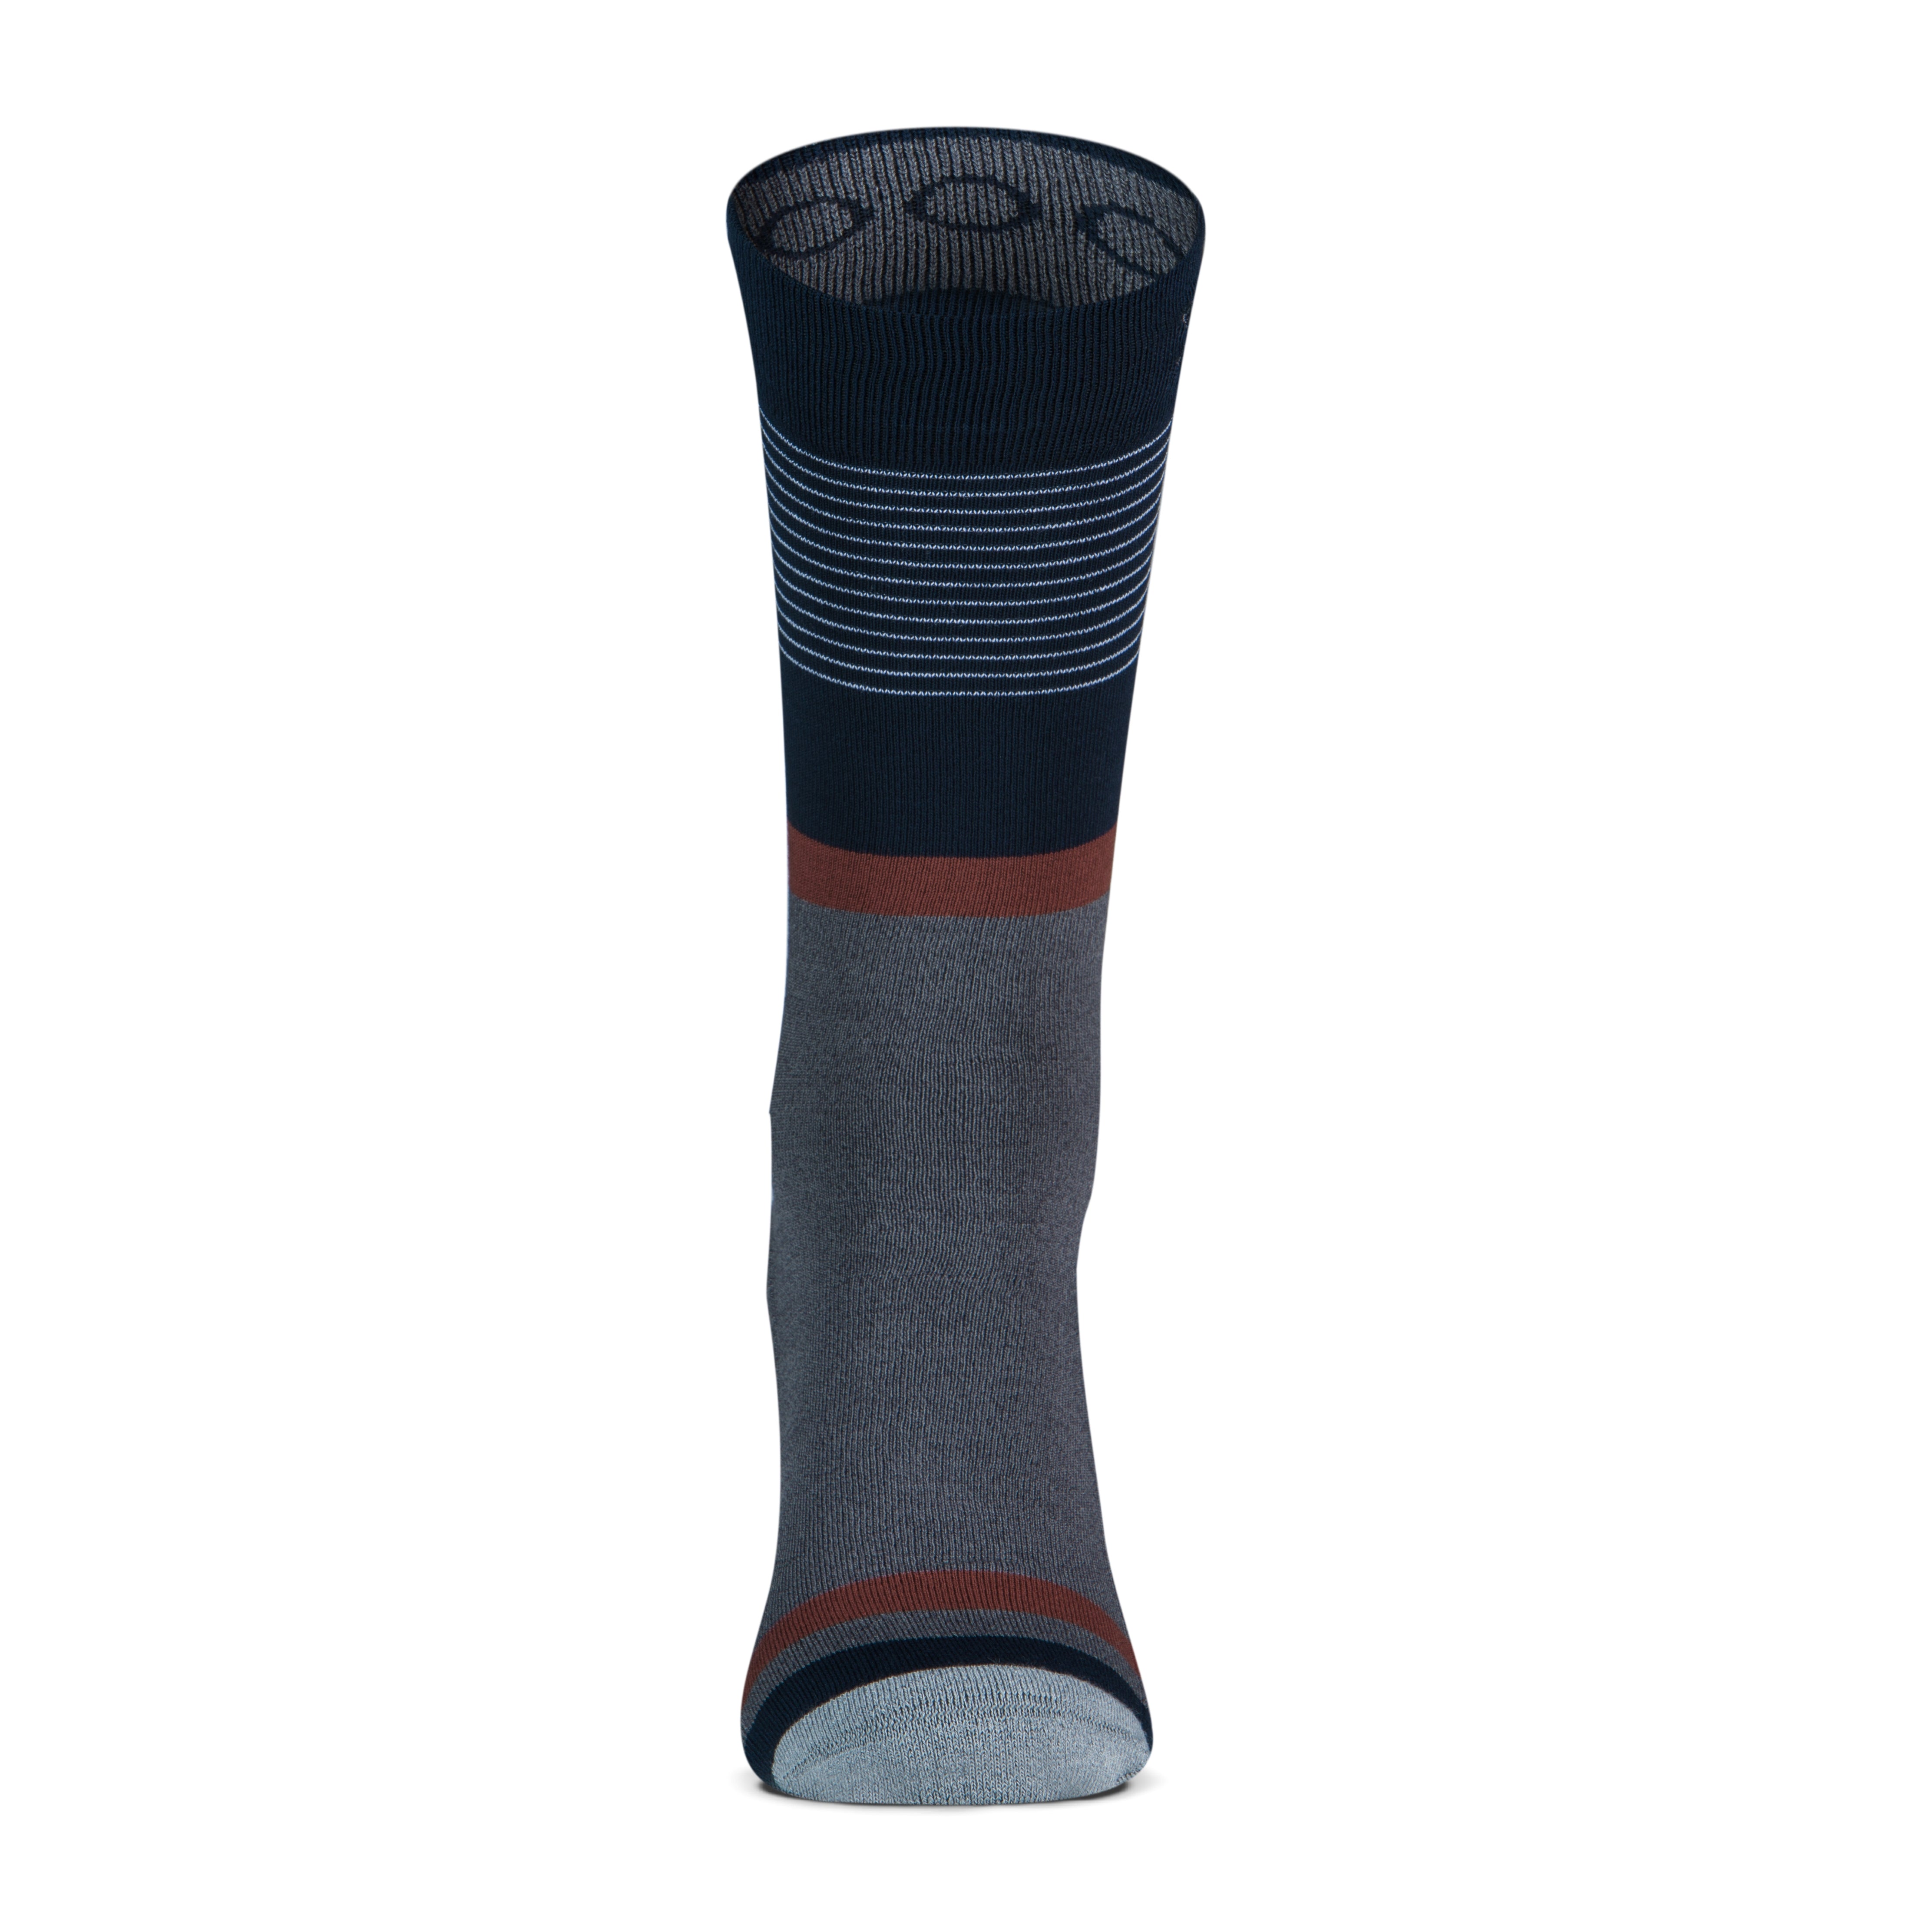 Hong Kong chaussettes pour hommes Grey